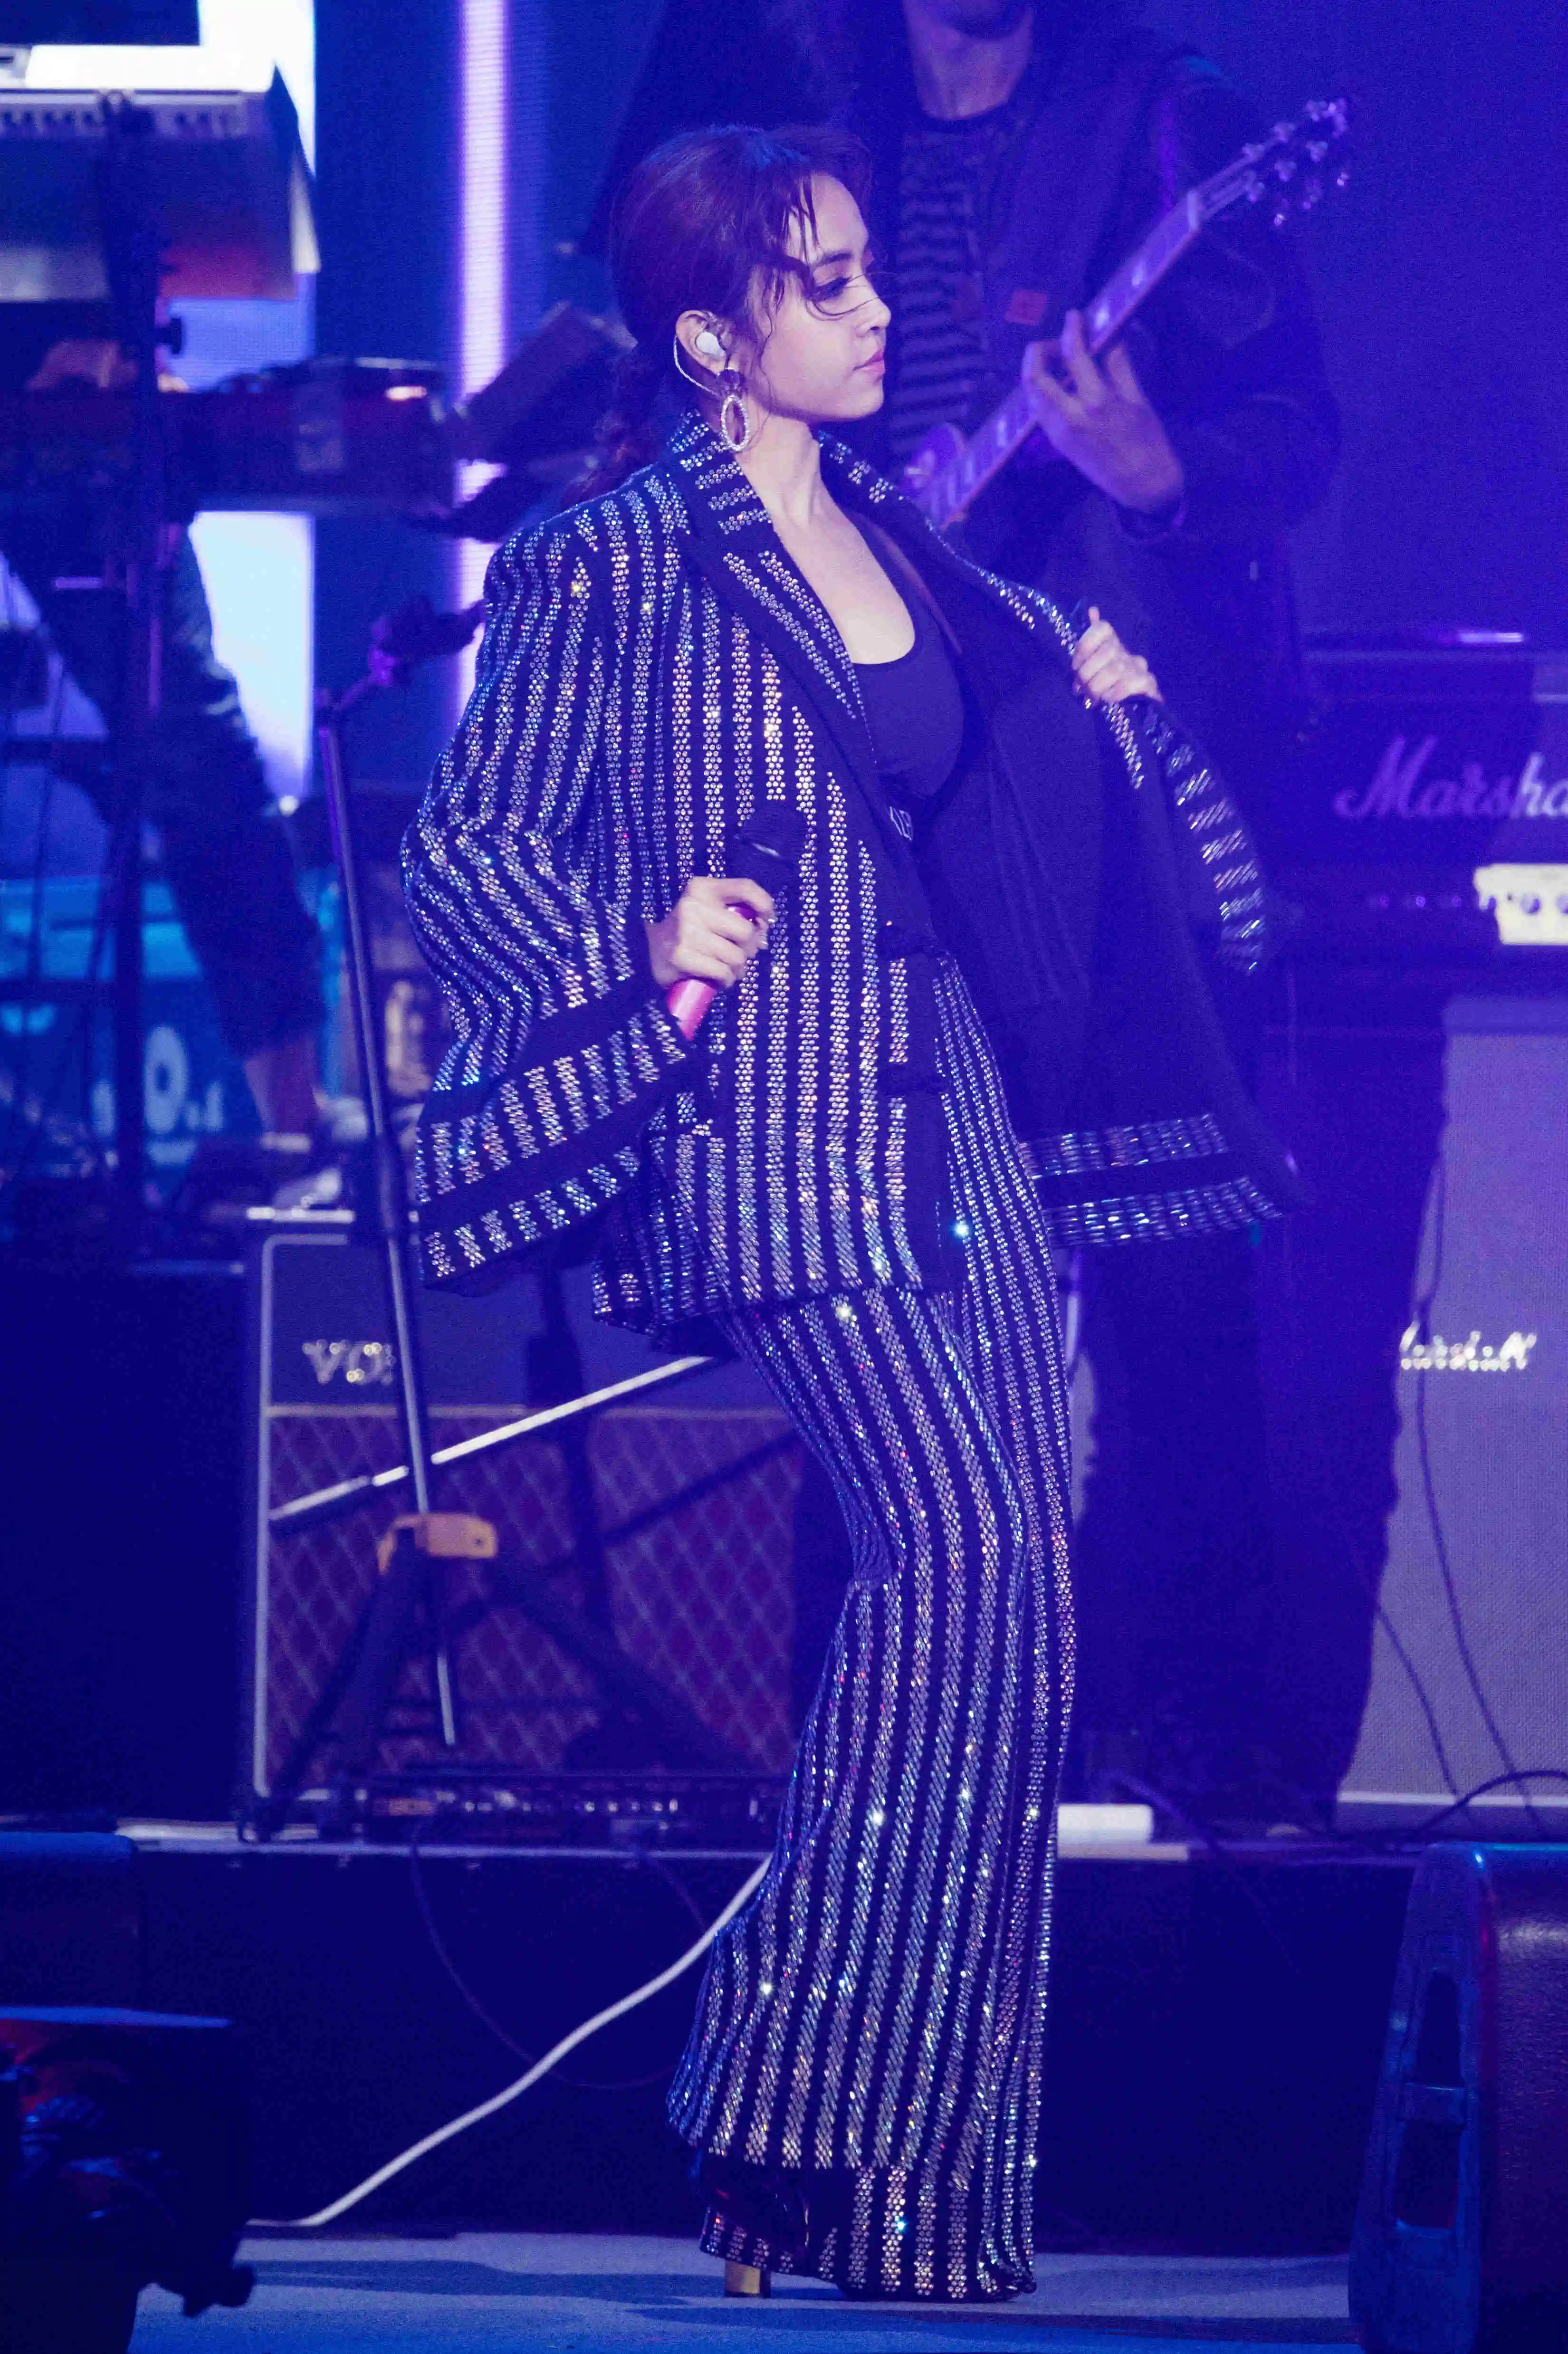 Jolin Tsai's shiny striped suit takes the stage to set off the atmosphere. JPG